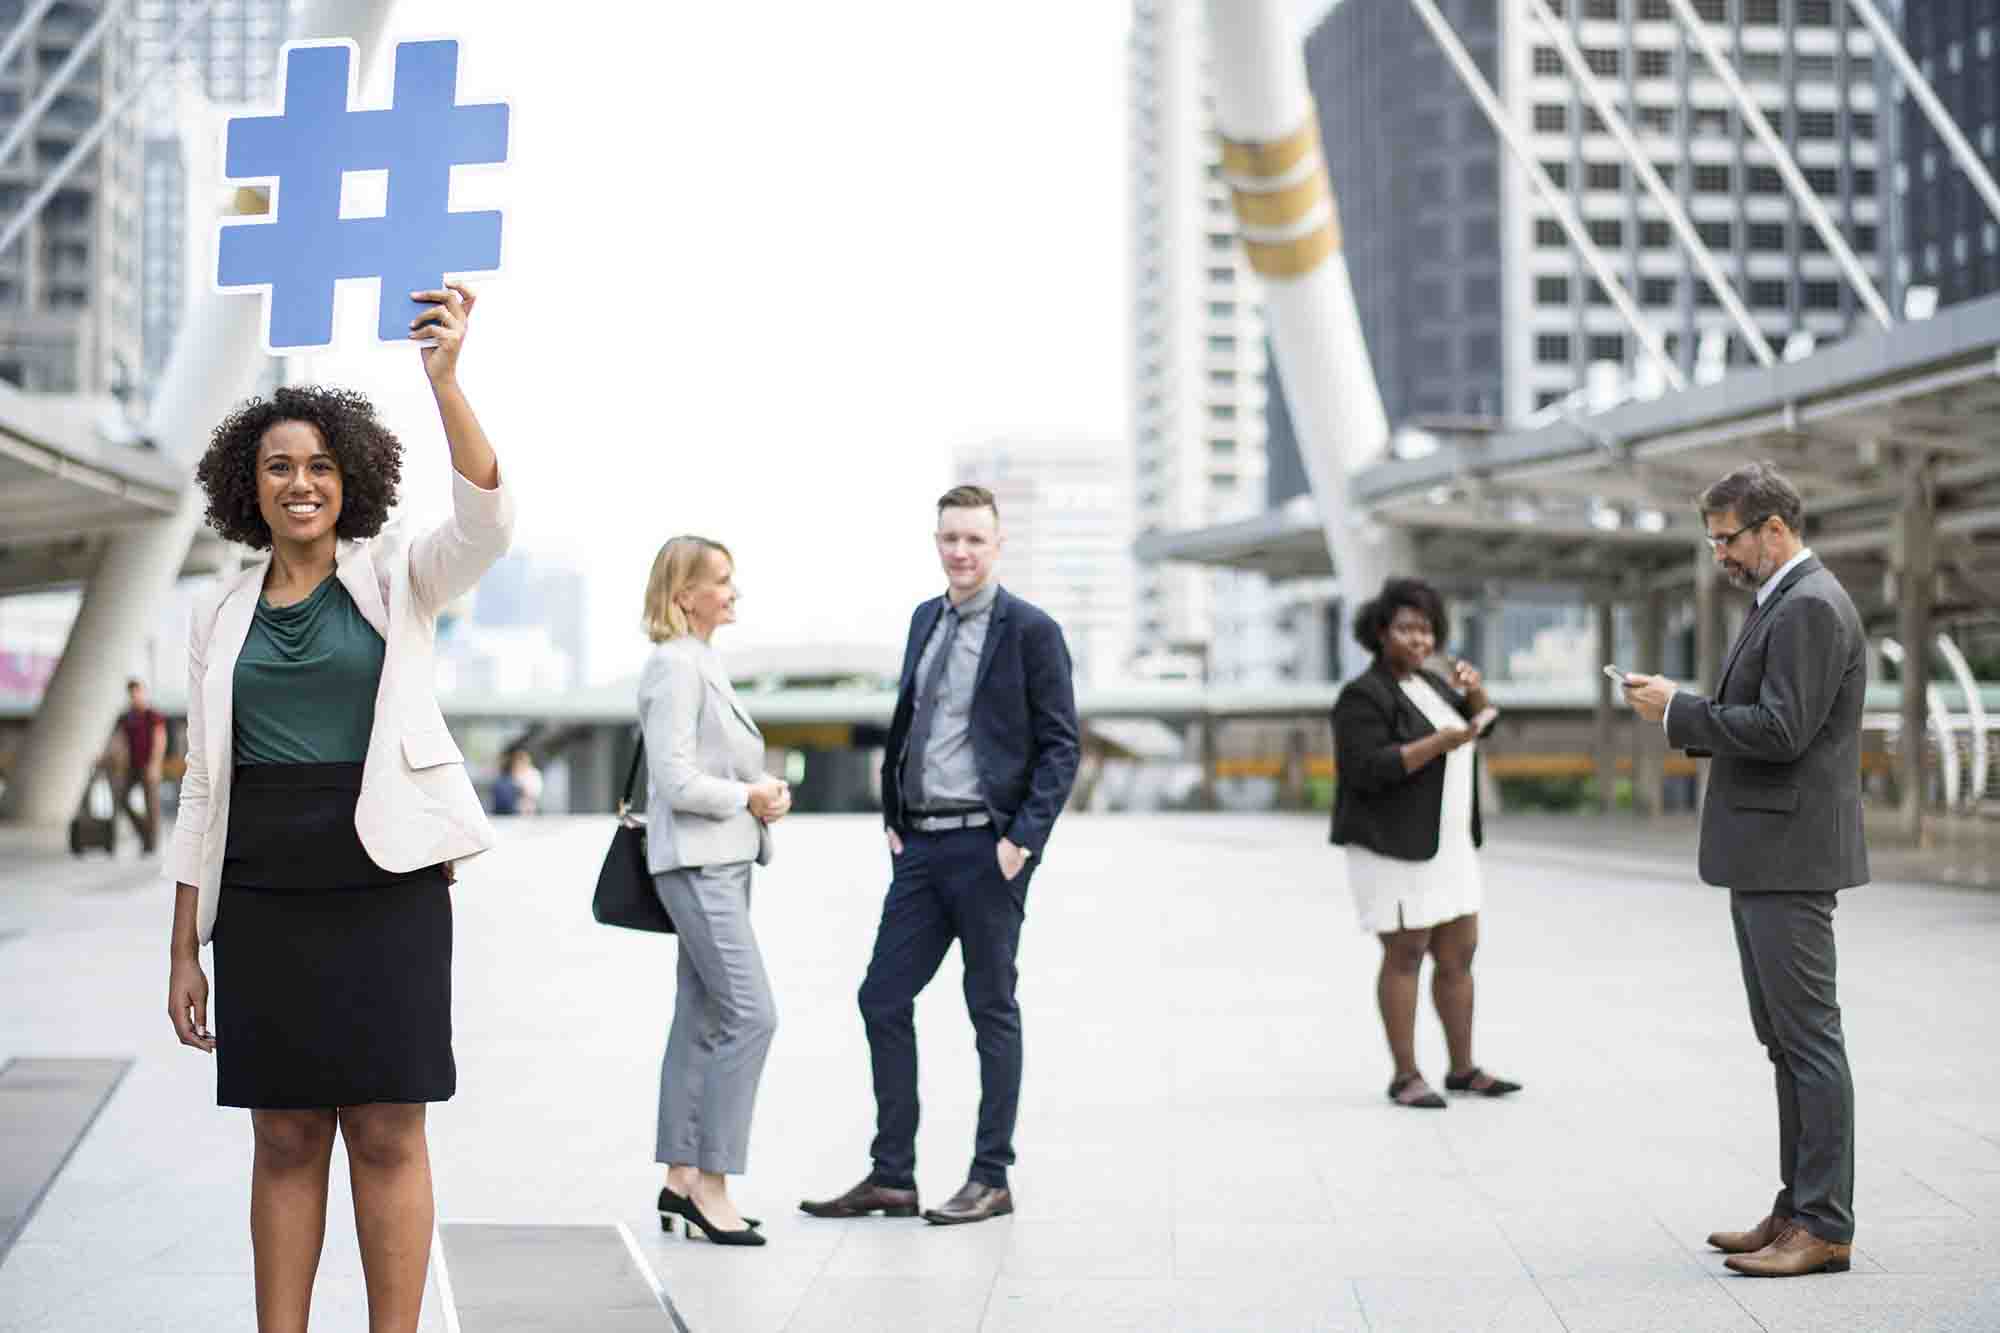 How to choose the right hashtags for your brand